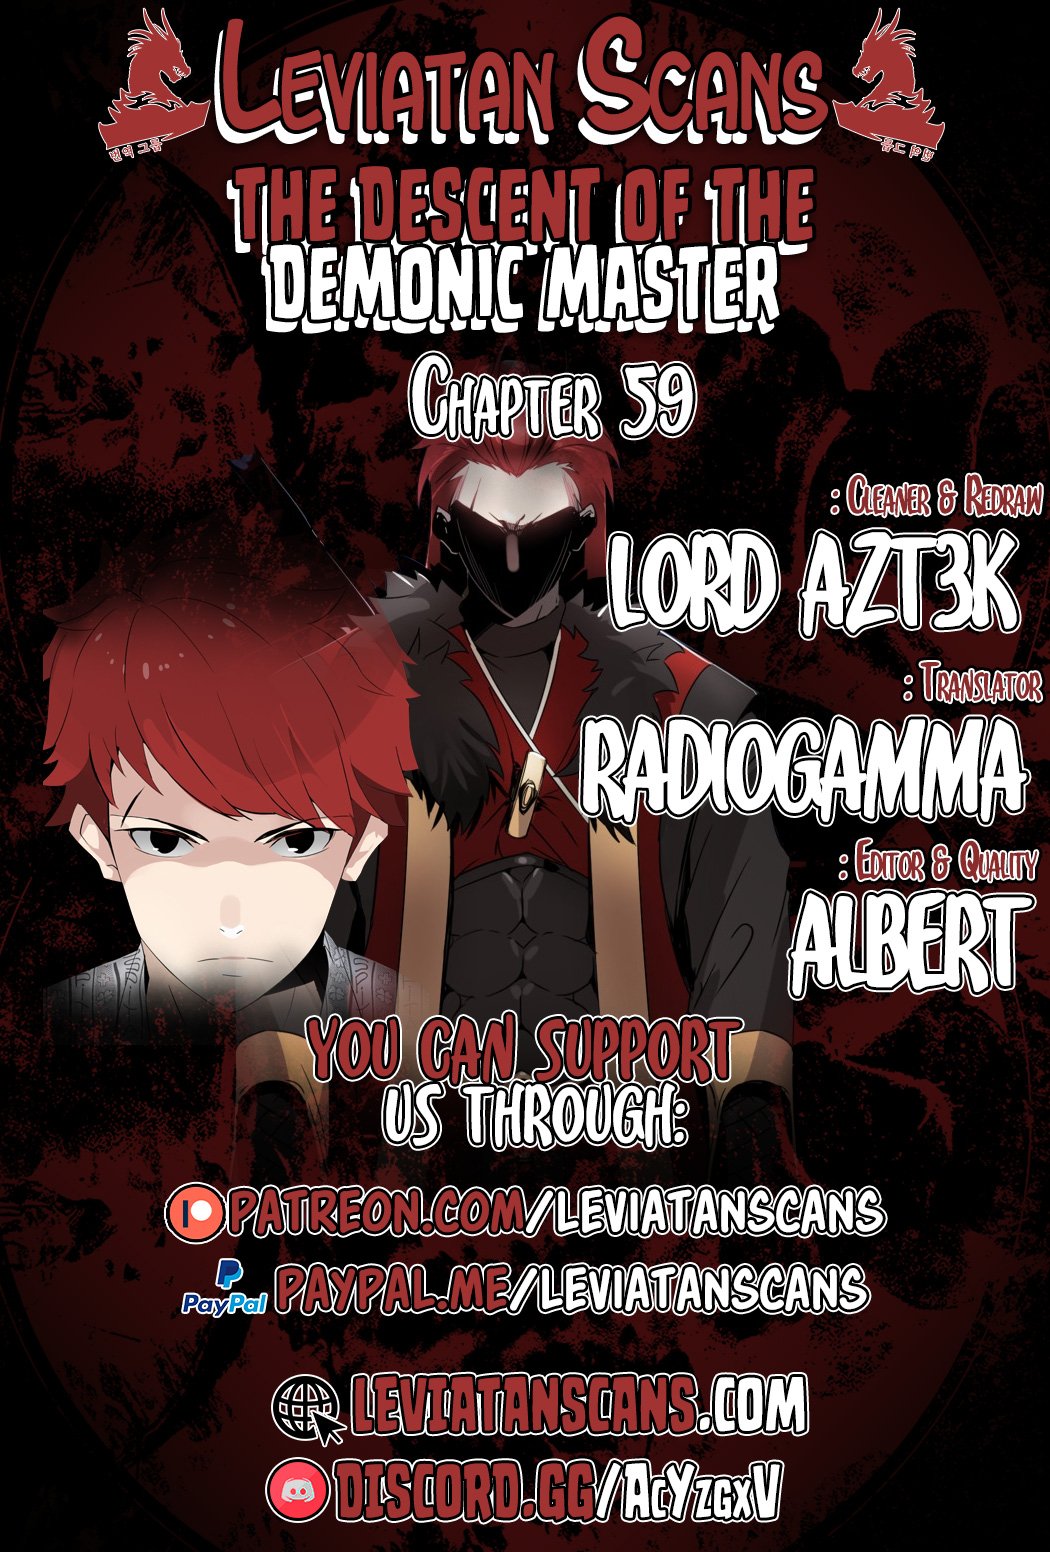 The Descent of the Demonic Master59 01